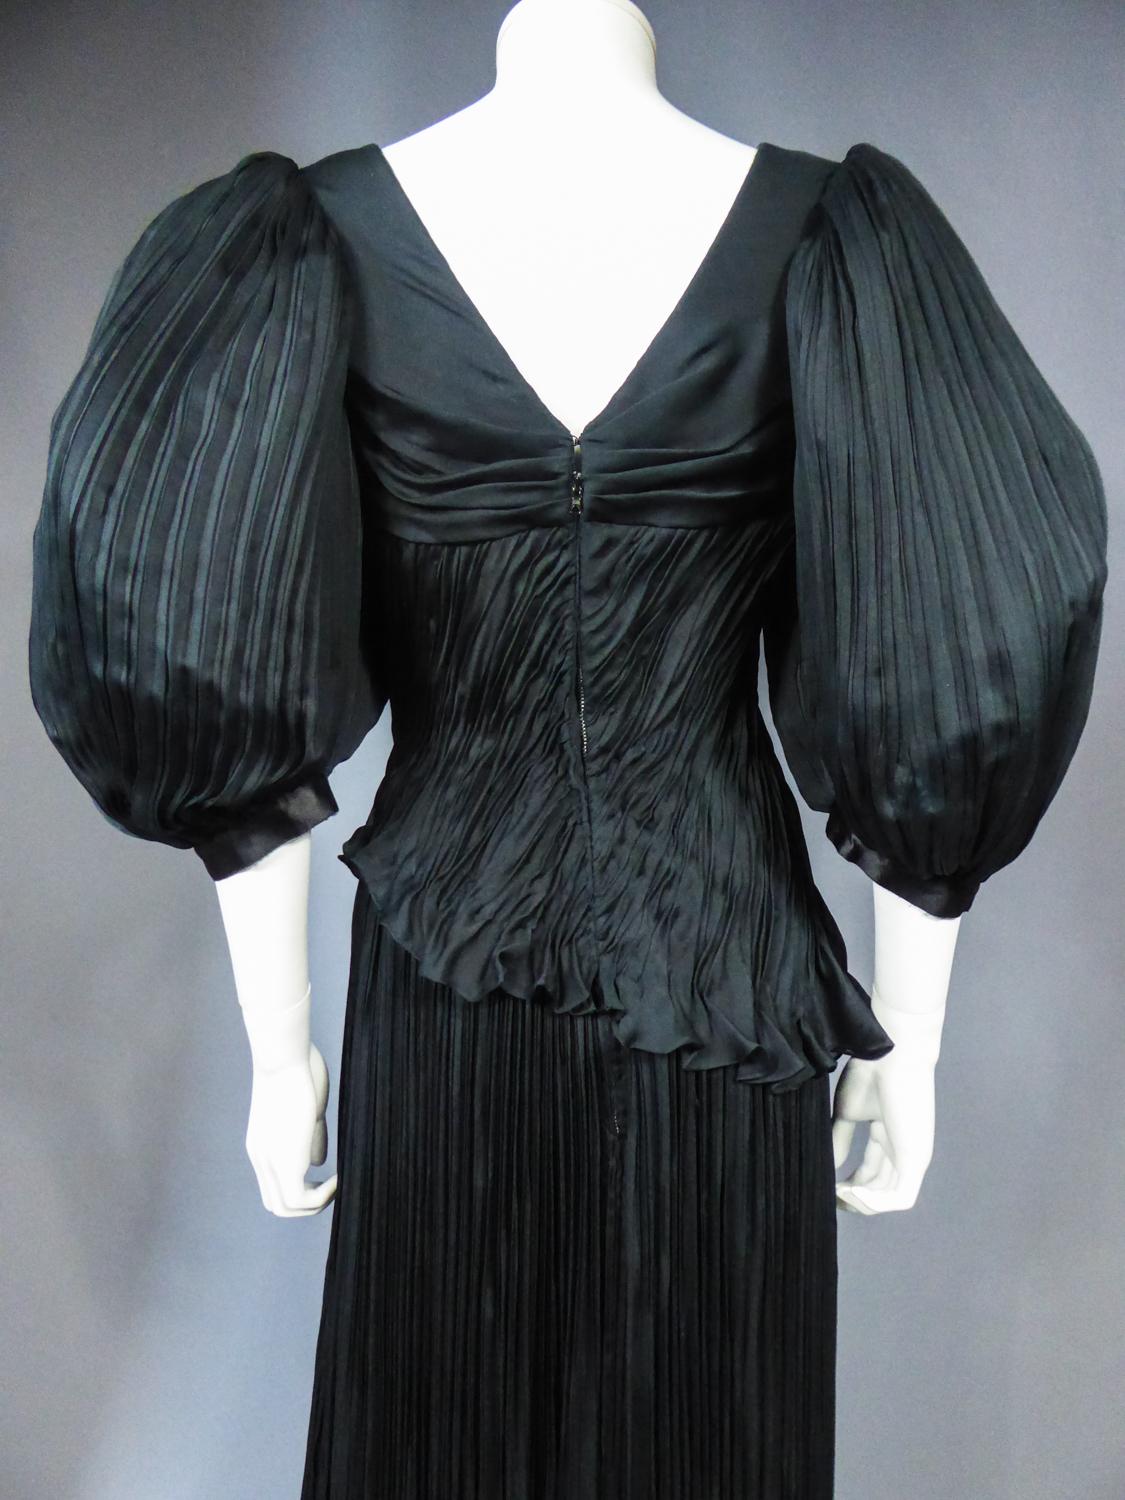 An Emanuel Ungaro French Evening Dress Numbered 295-5-85 Circa 1985/1990 For Sale 9